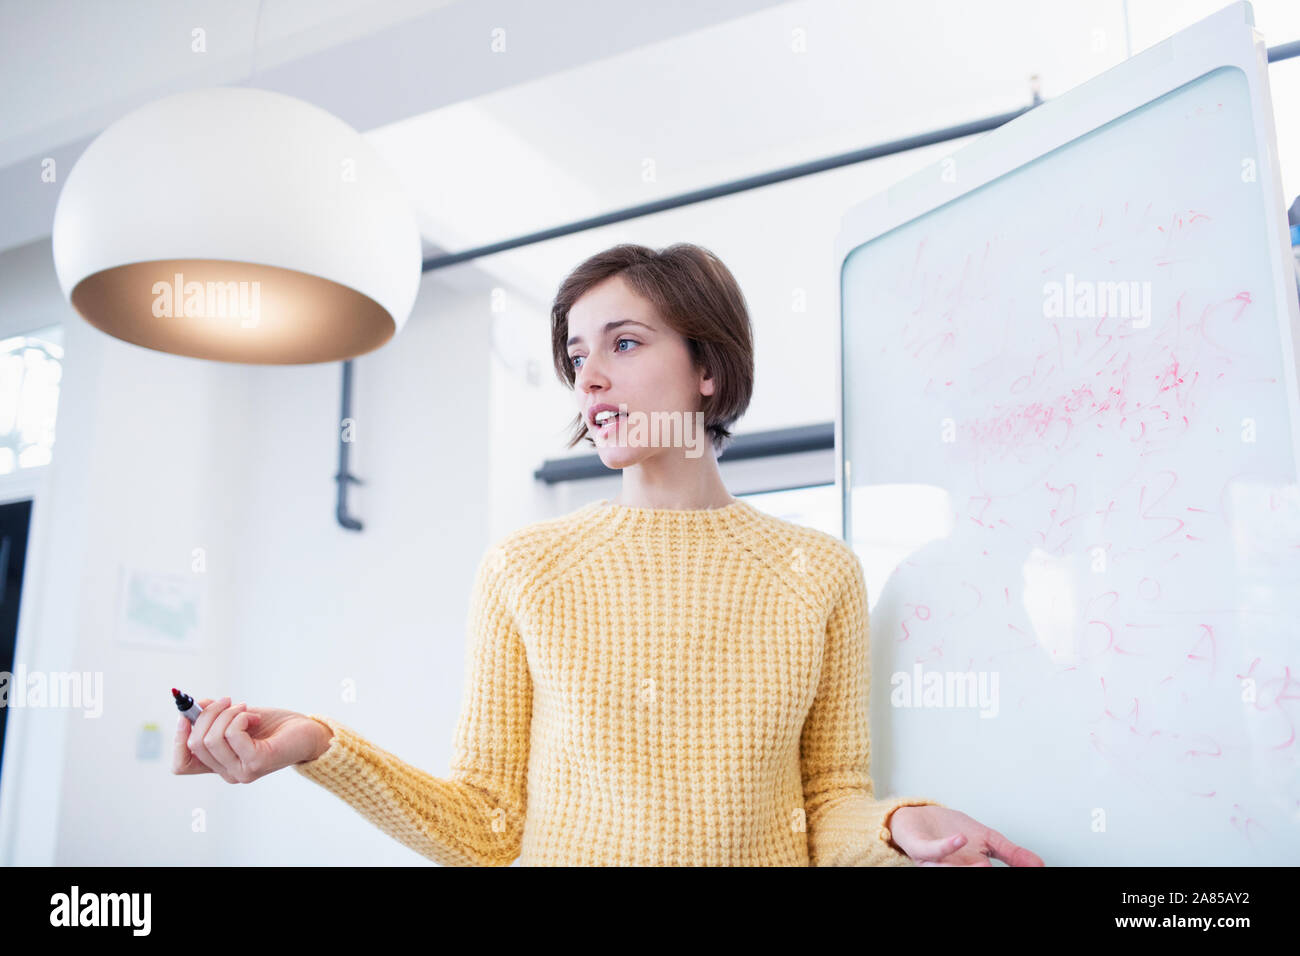 Businesswoman at whiteboard leading meeting Stock Photo